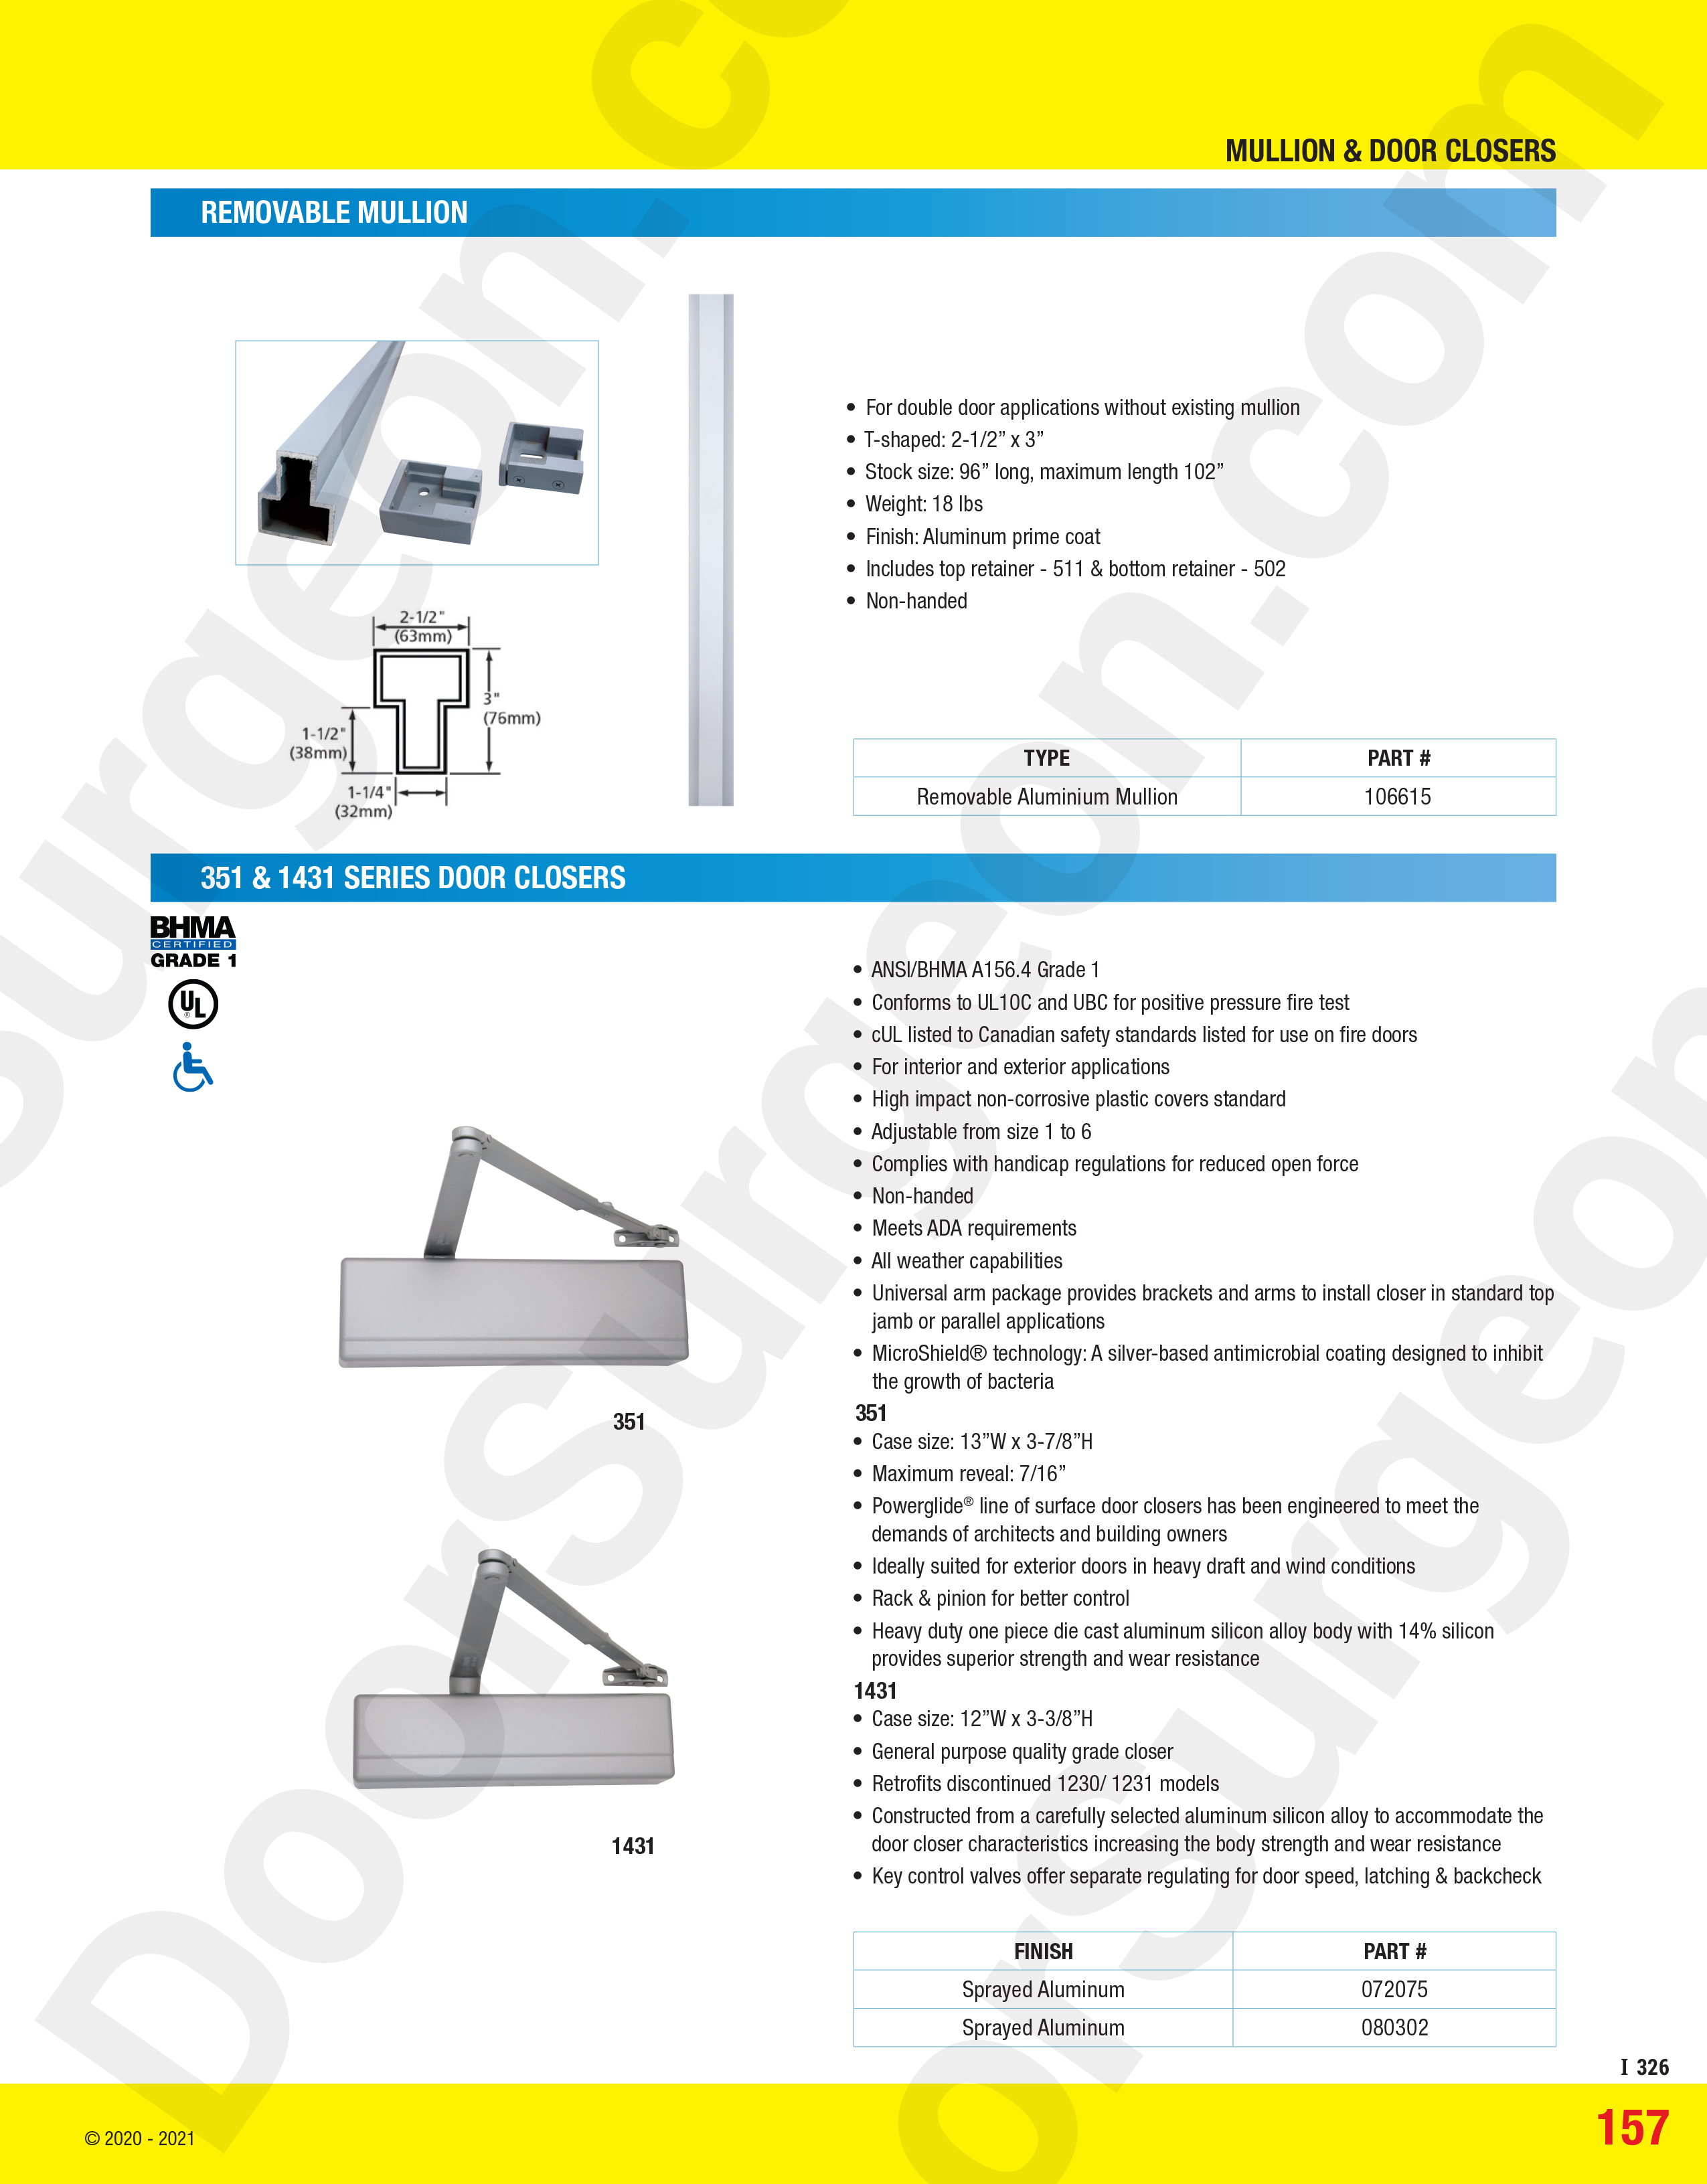 Double-door removable mullion, 351 and 1431 series door closers